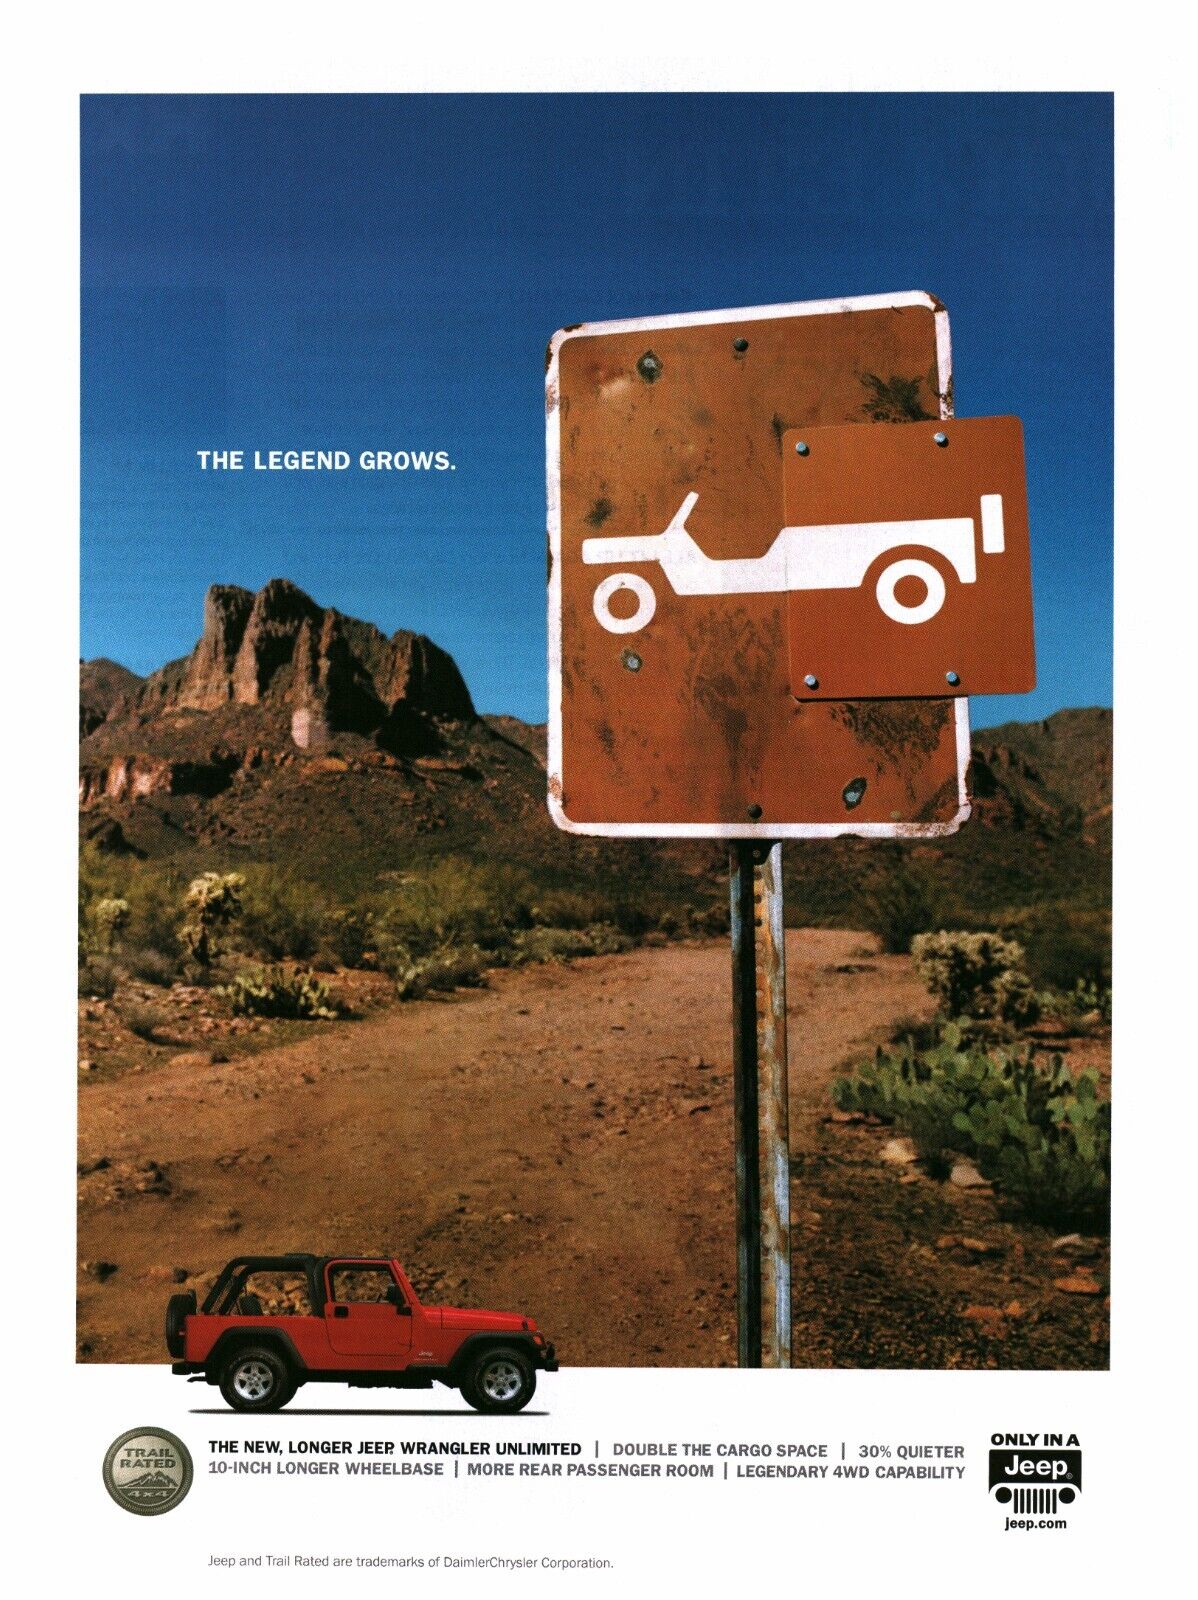 2004 PRINT AD - JEEP - NEW LONGER JEEP WRANGLER UNLIMITED . THE LEGEND GROWS